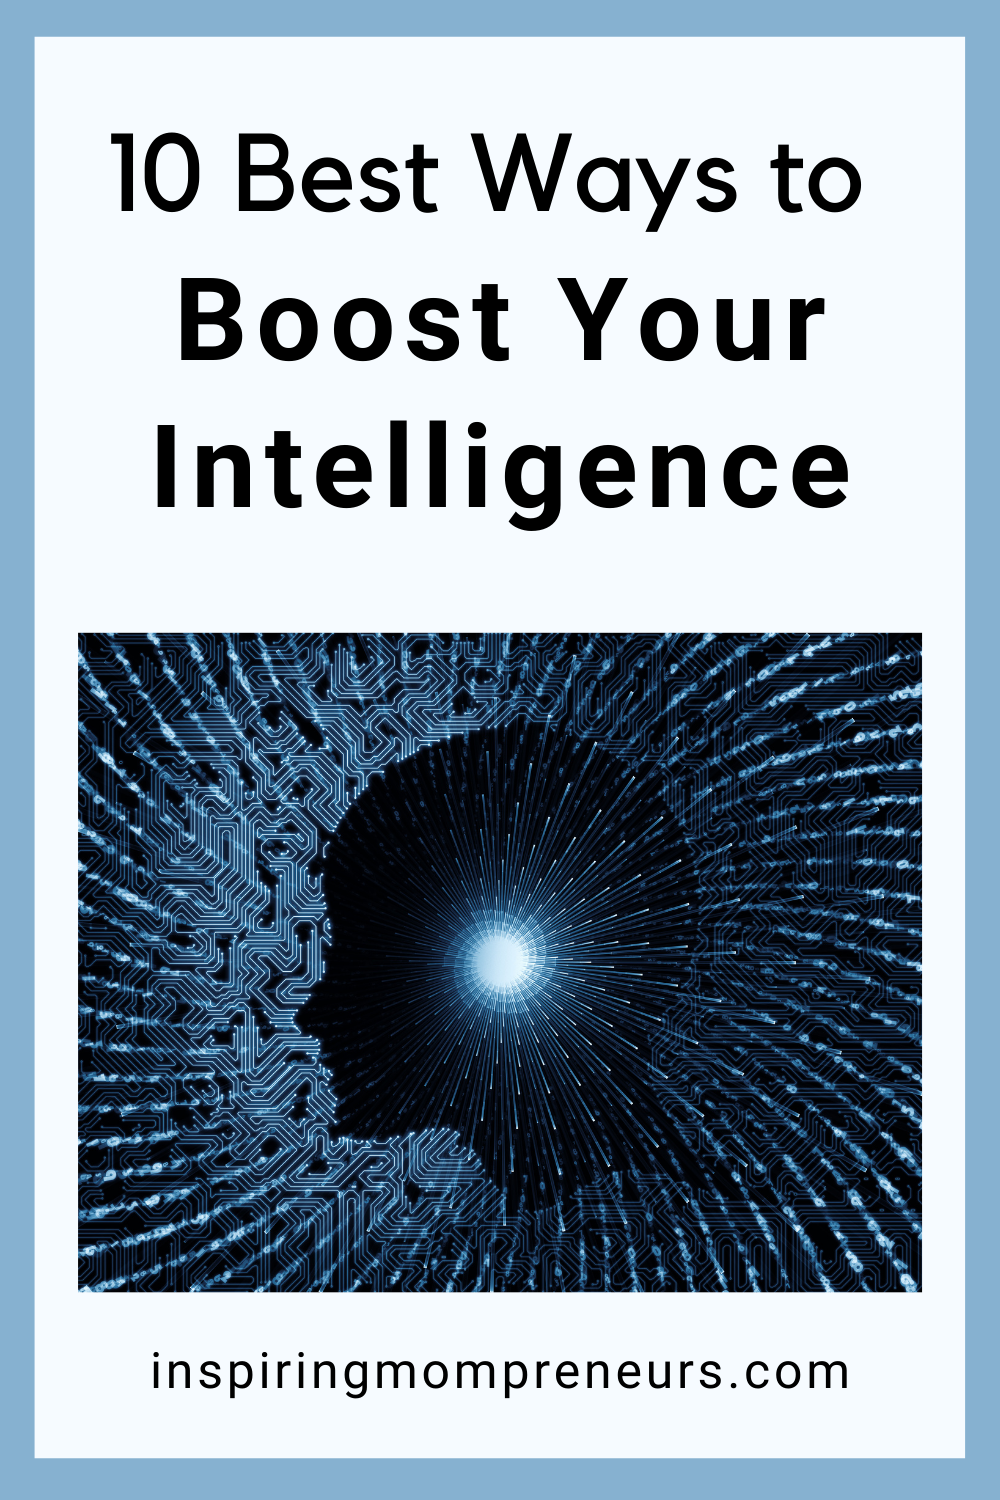 Intelligence is not a set trait. It can improve over time. The key is to practice positive lifestyle habits like these 10 best ways to boost your intelligence.